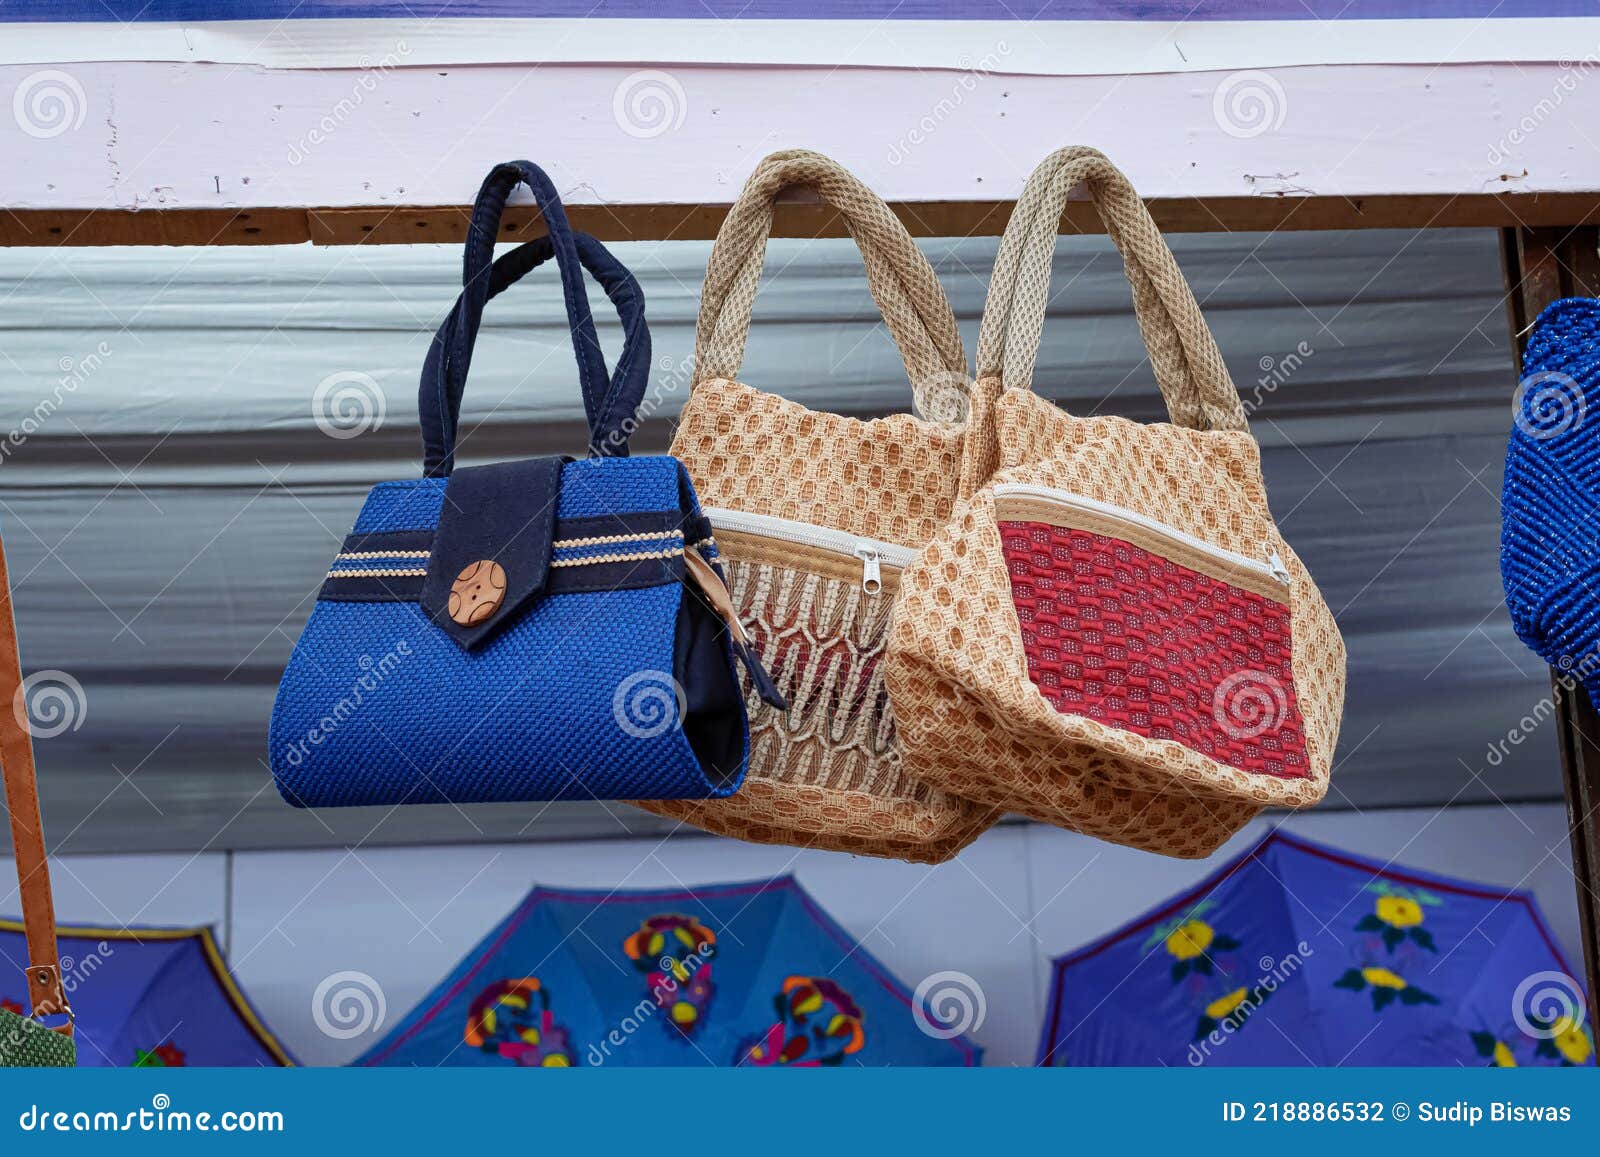 Premium Photo  Indian woman holds shopping bags in hands sale and black  friday concept